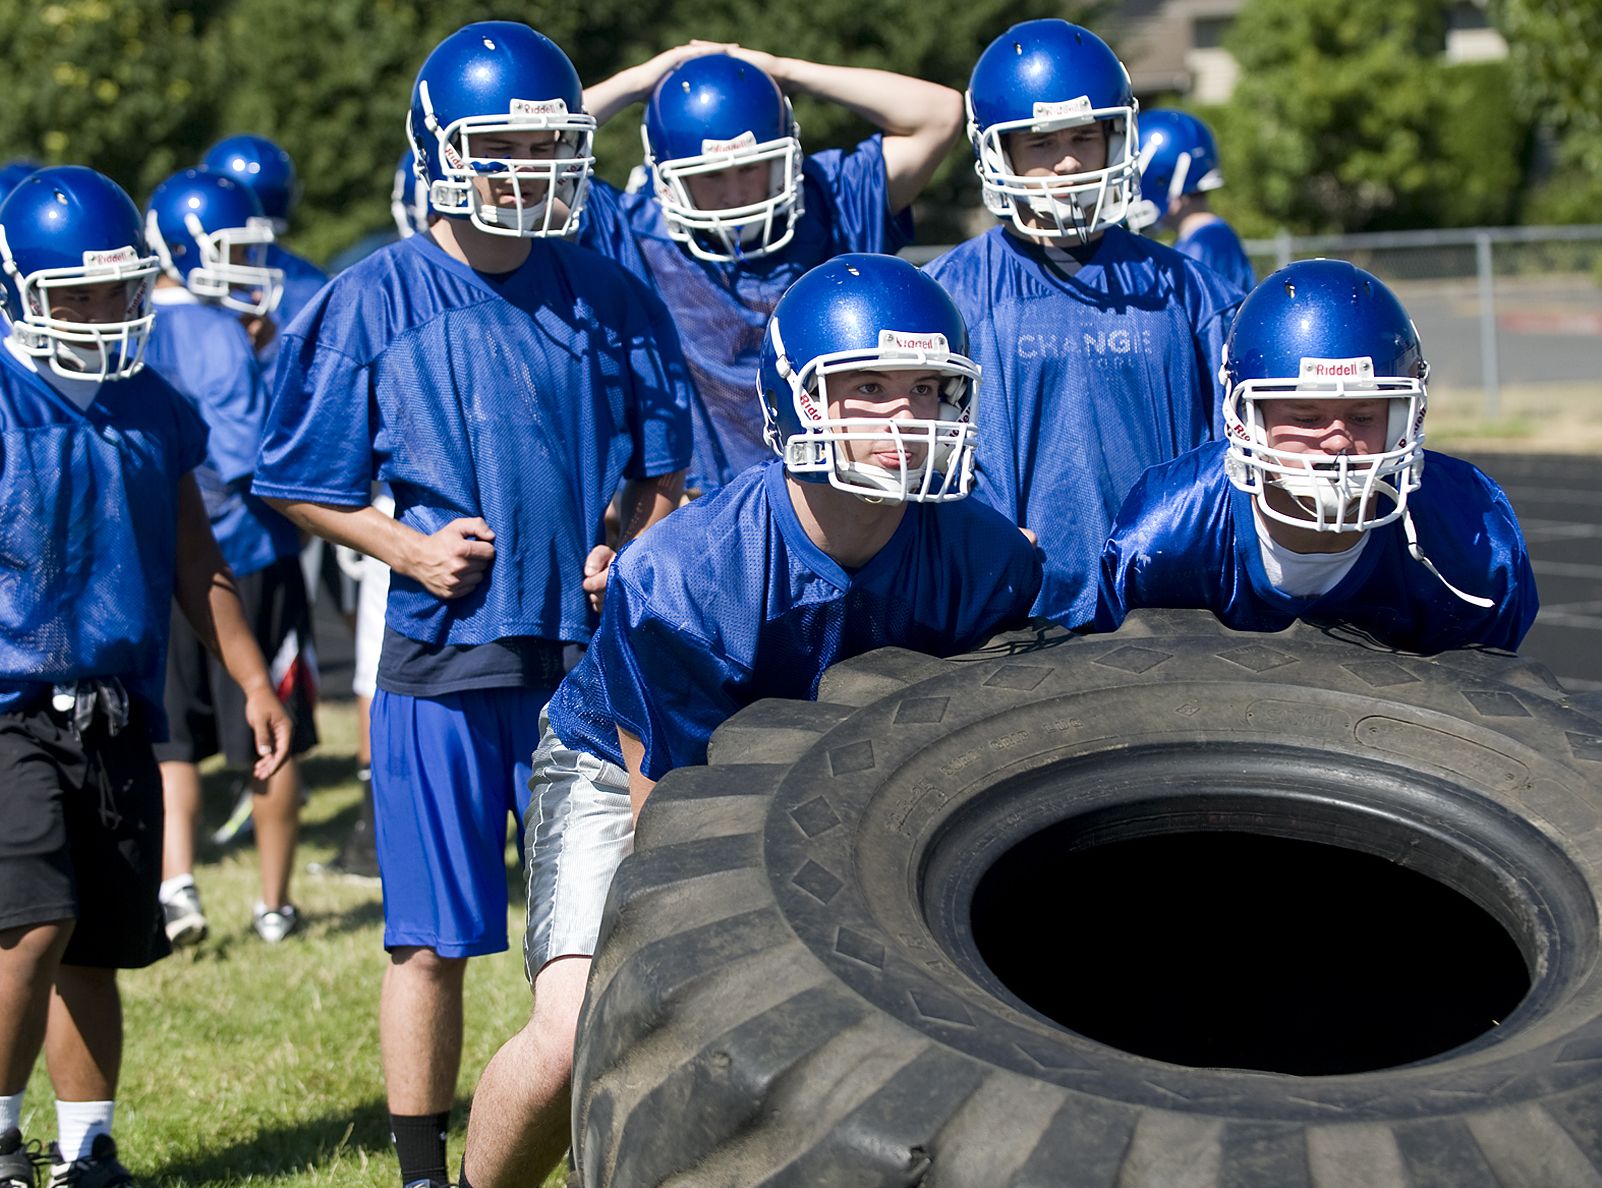 Mountain View High School football players take part in a unique drill during the first day of practice on Wednesday